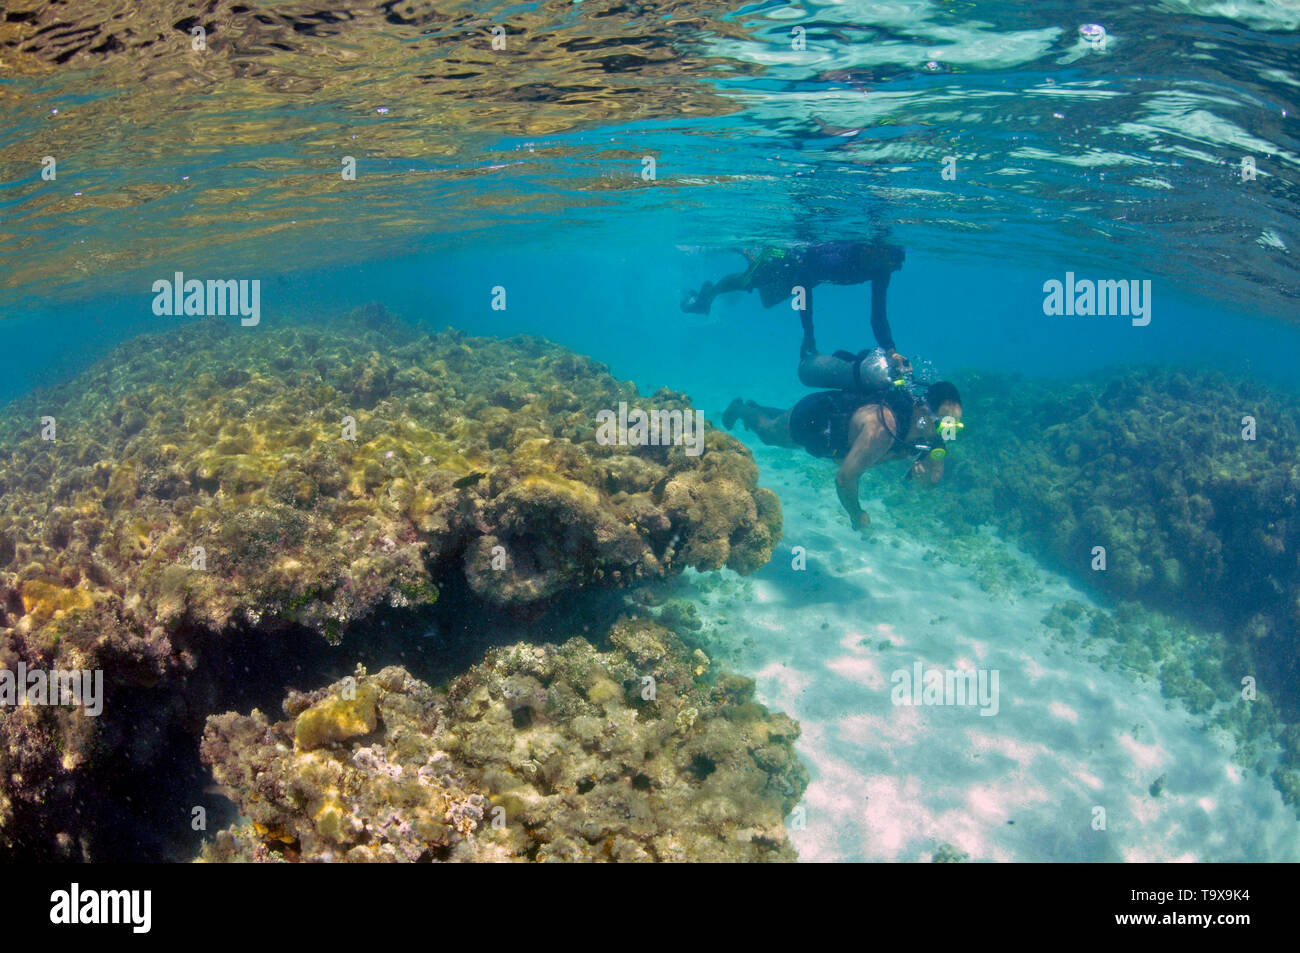 Scuba dive assisted by snorkeling guide in the dead coral reef of the Natural Pools or "Gales", Maragogi, Alagoas, Brazil Stock Photo